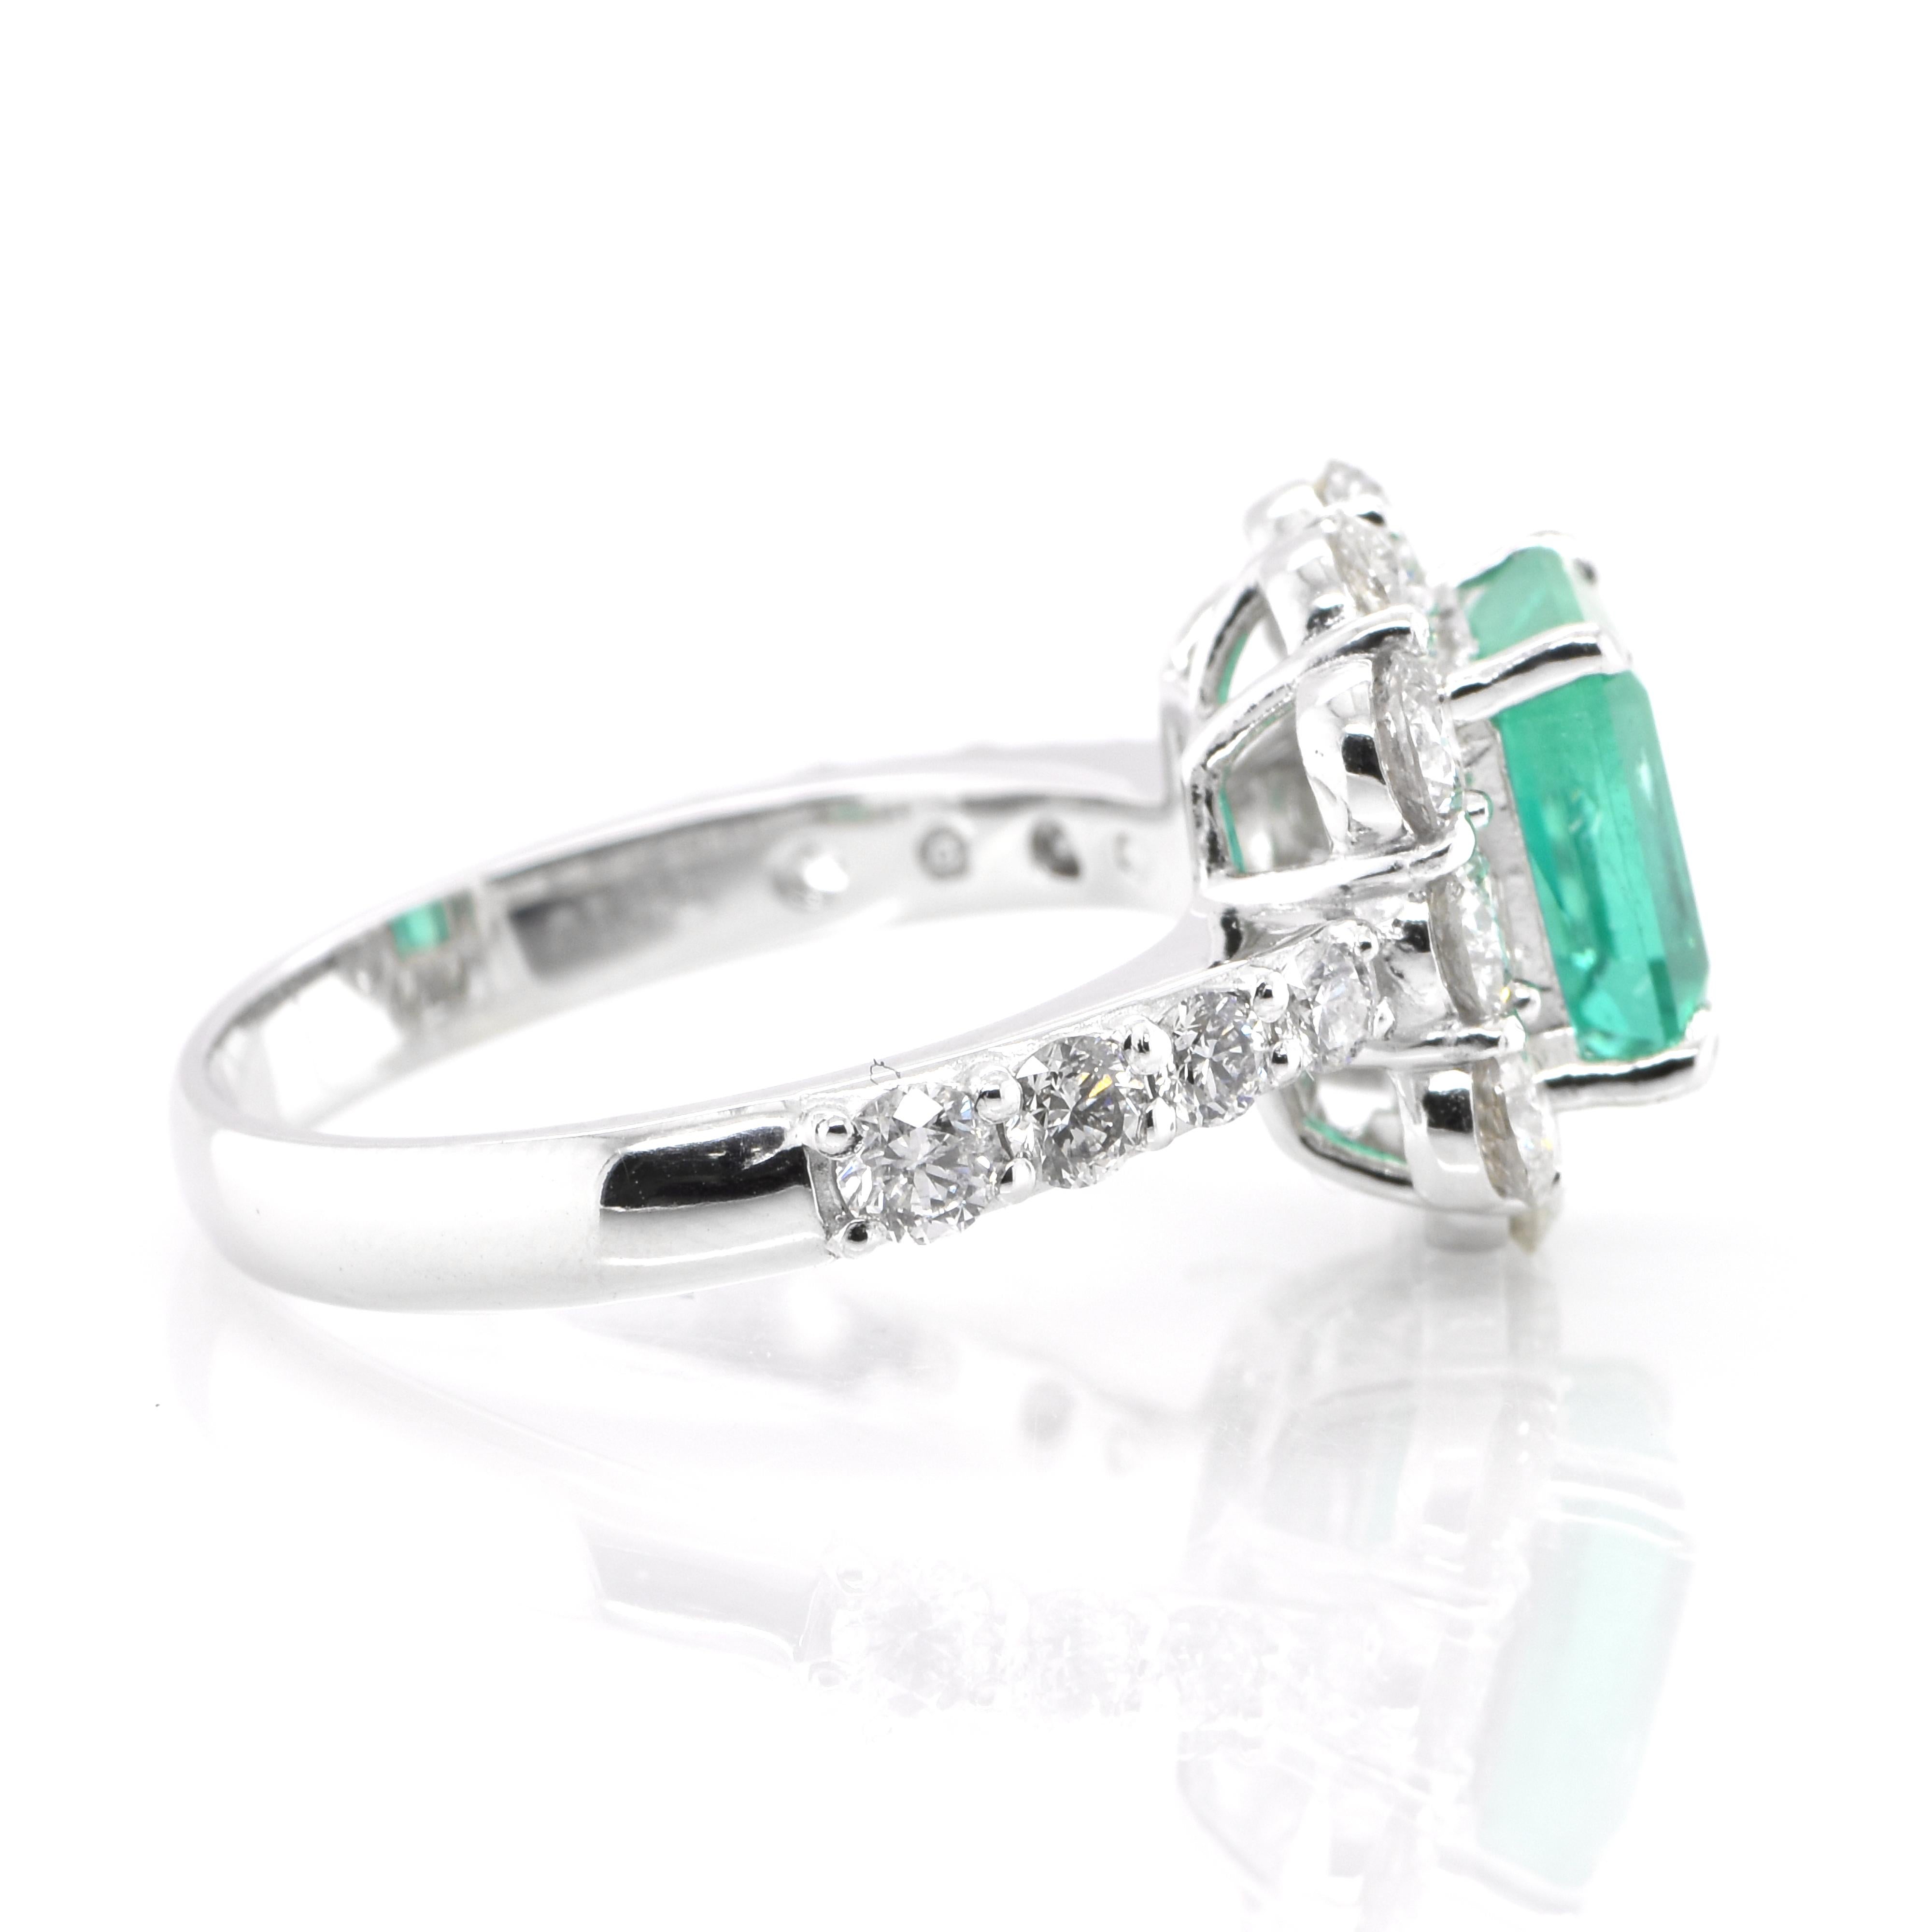 Emerald Cut 1.86 Carat Natural Colombian Emerald and Diamond Ring Set in Platinum For Sale